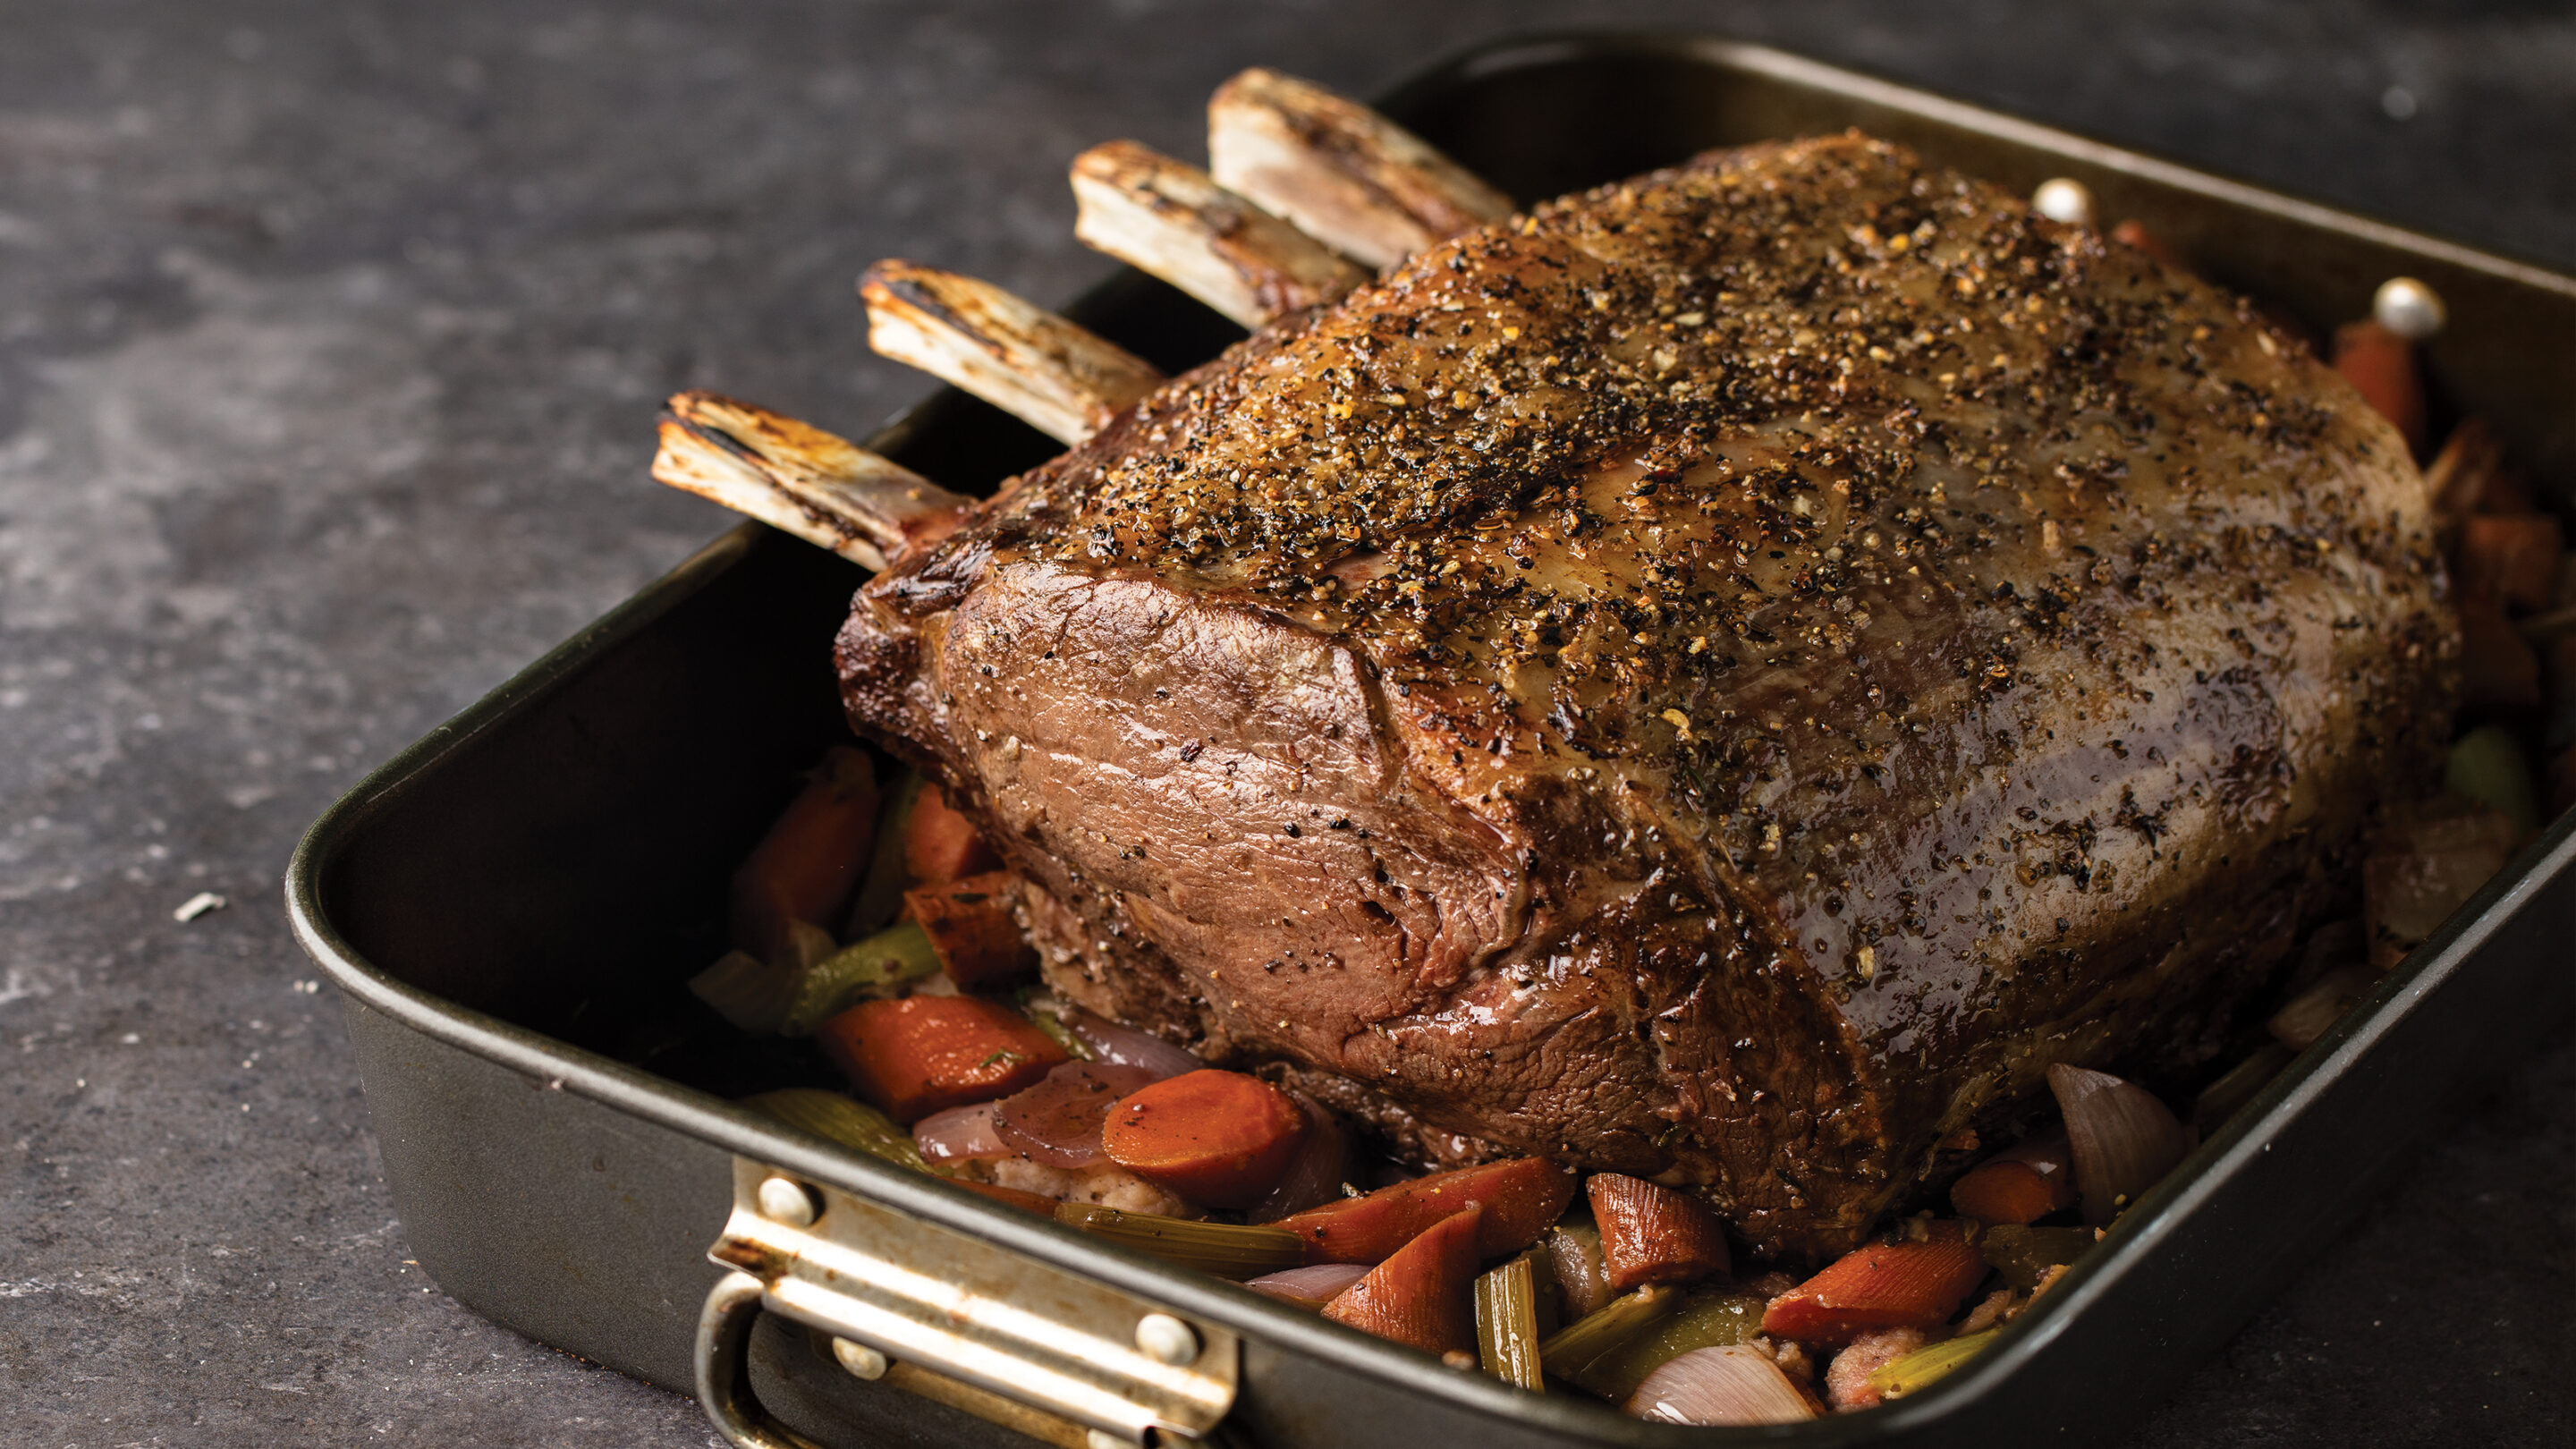 https://blog-content.omahasteaks.com/wp-content/uploads/2022/06/blogwp_prime-rib-roast-with-rosemary-scaled-1.jpg